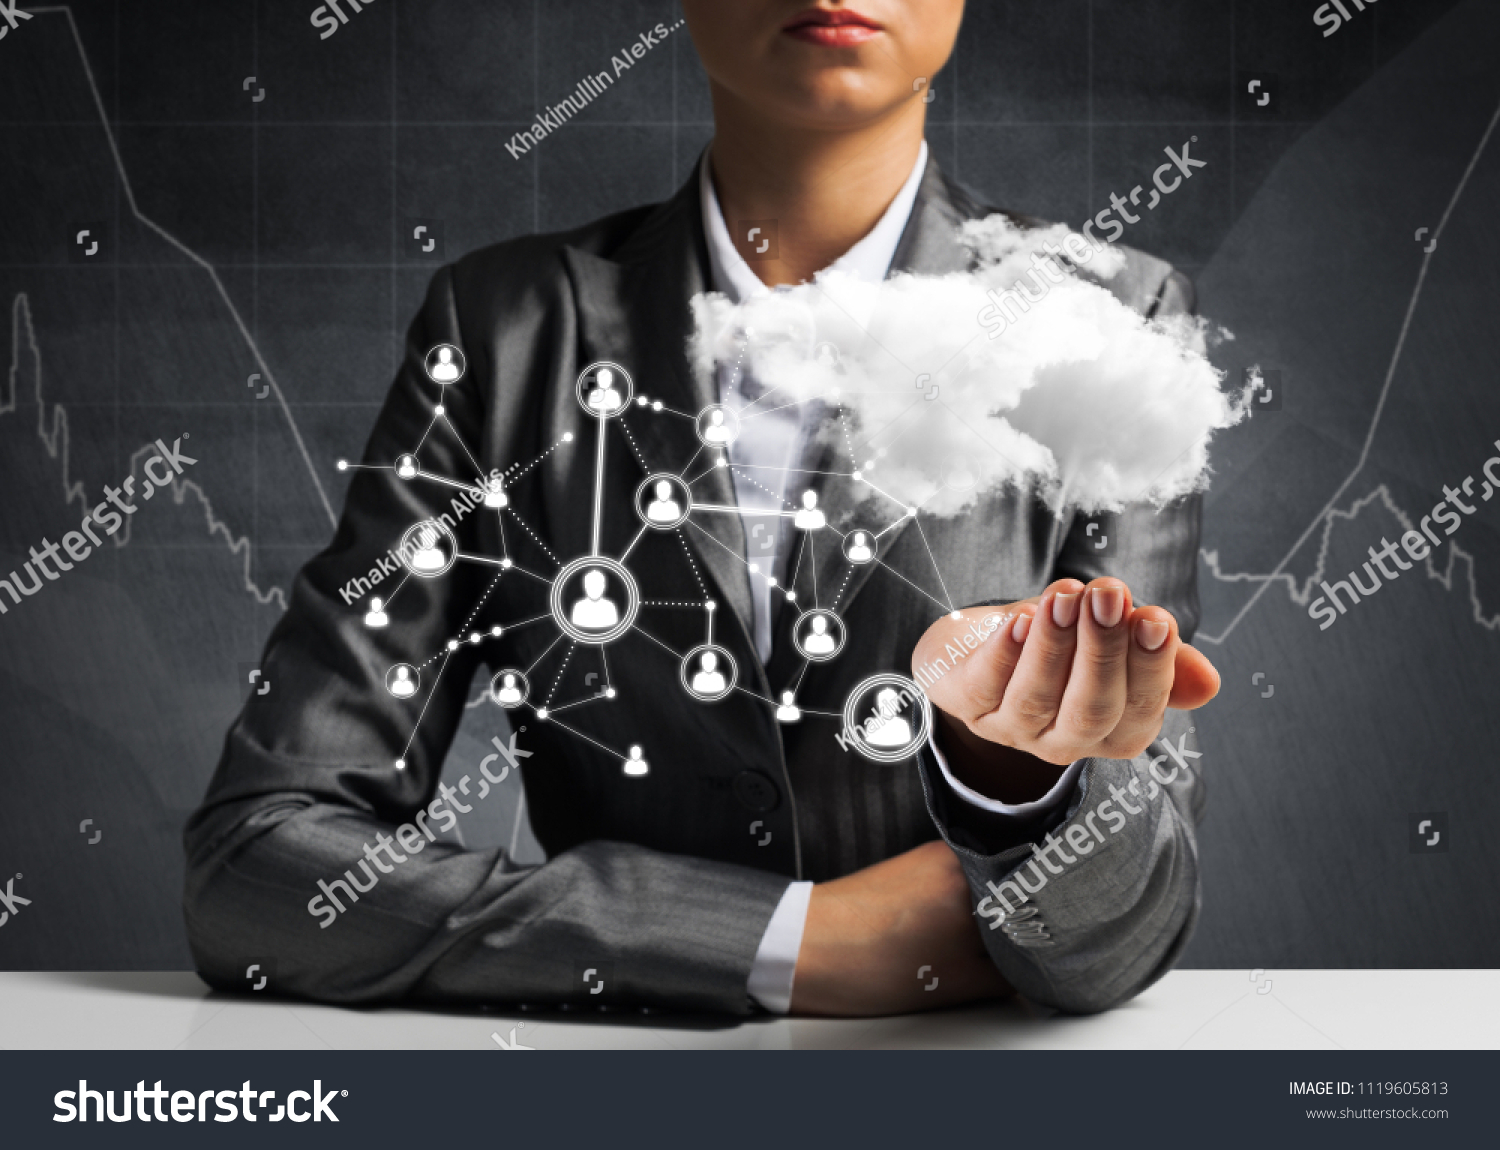 Businessman in suit keeping cloud with network connections in hand with business sketches on background. #1119605813